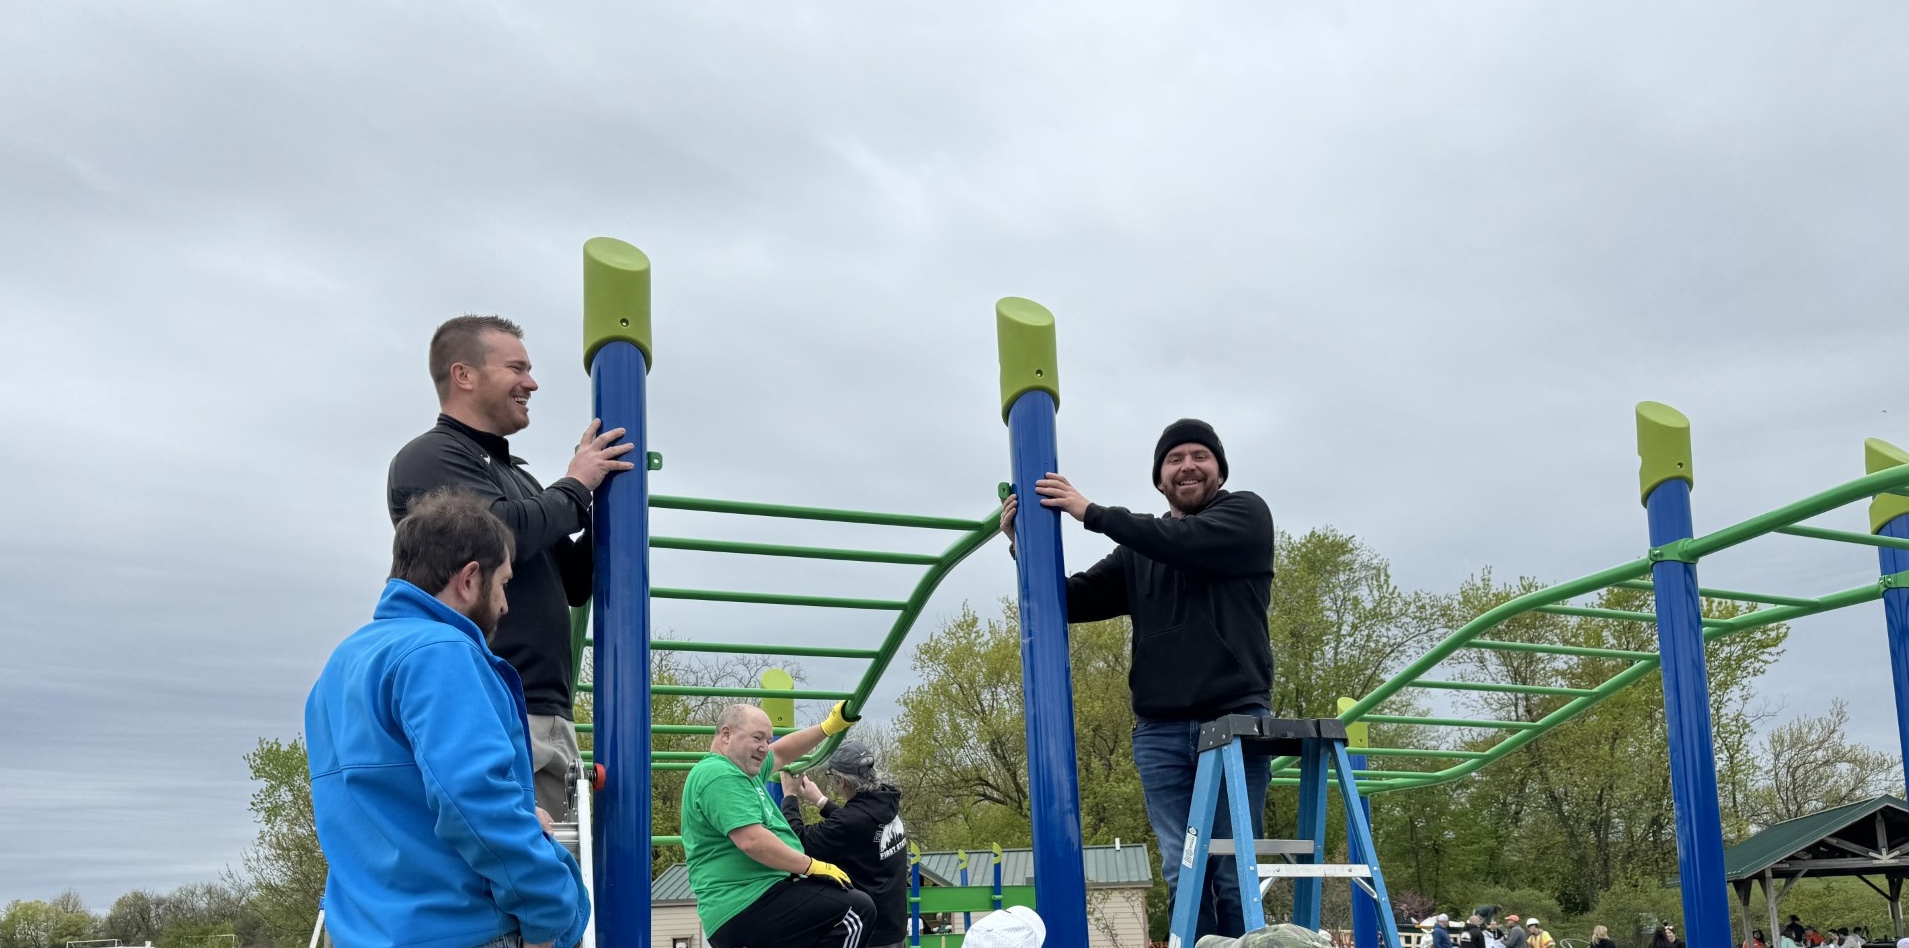 Building Community: Volunteers Come Together for Ninja Warrior Themed Playground Equipment Installation